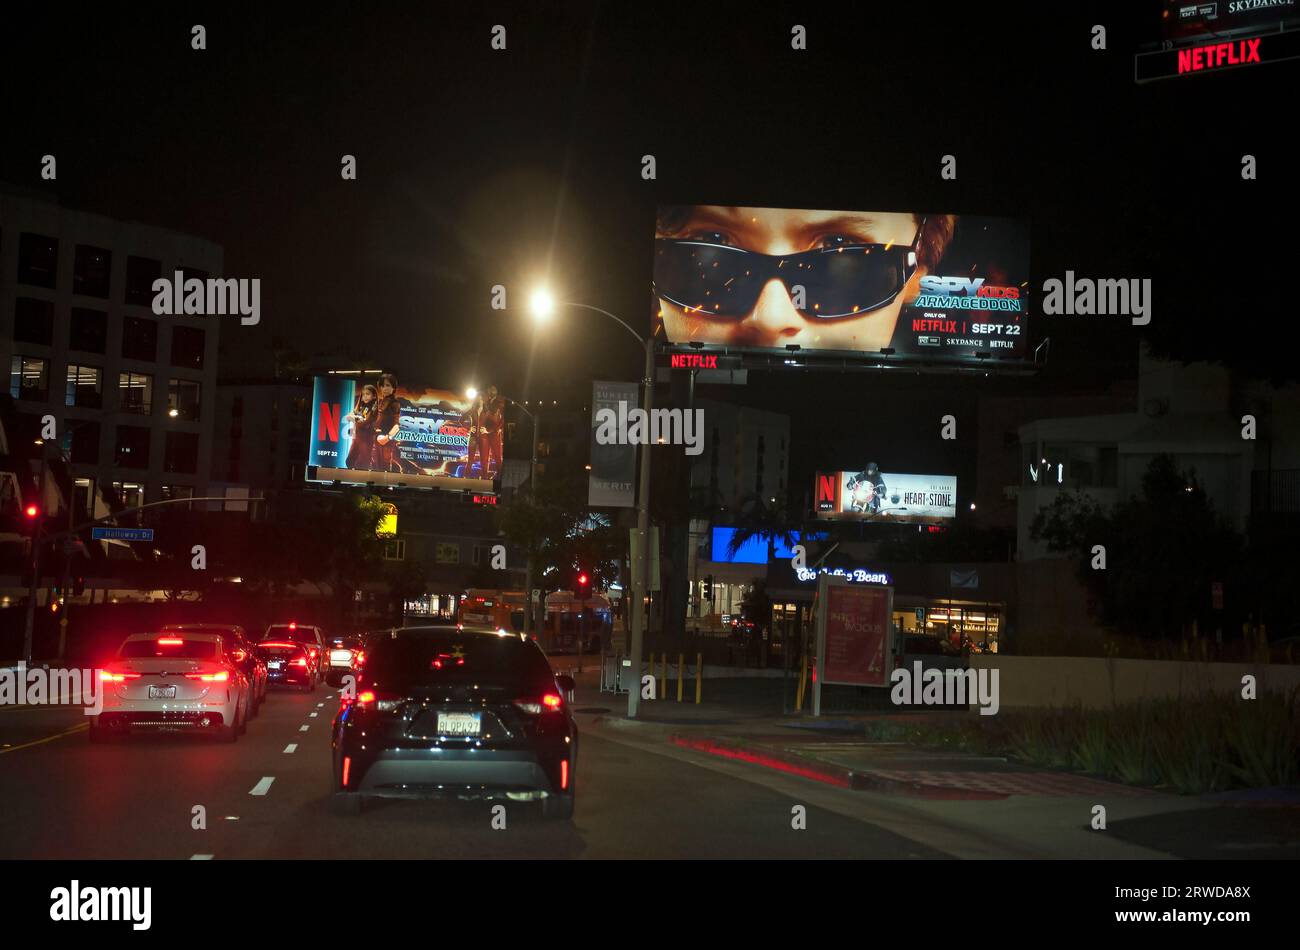 Photo taken through windshield of car driving on the Sunset Strip showing Netflix dominance of the billboards located there in Los Angeles, CA. Stock Photo